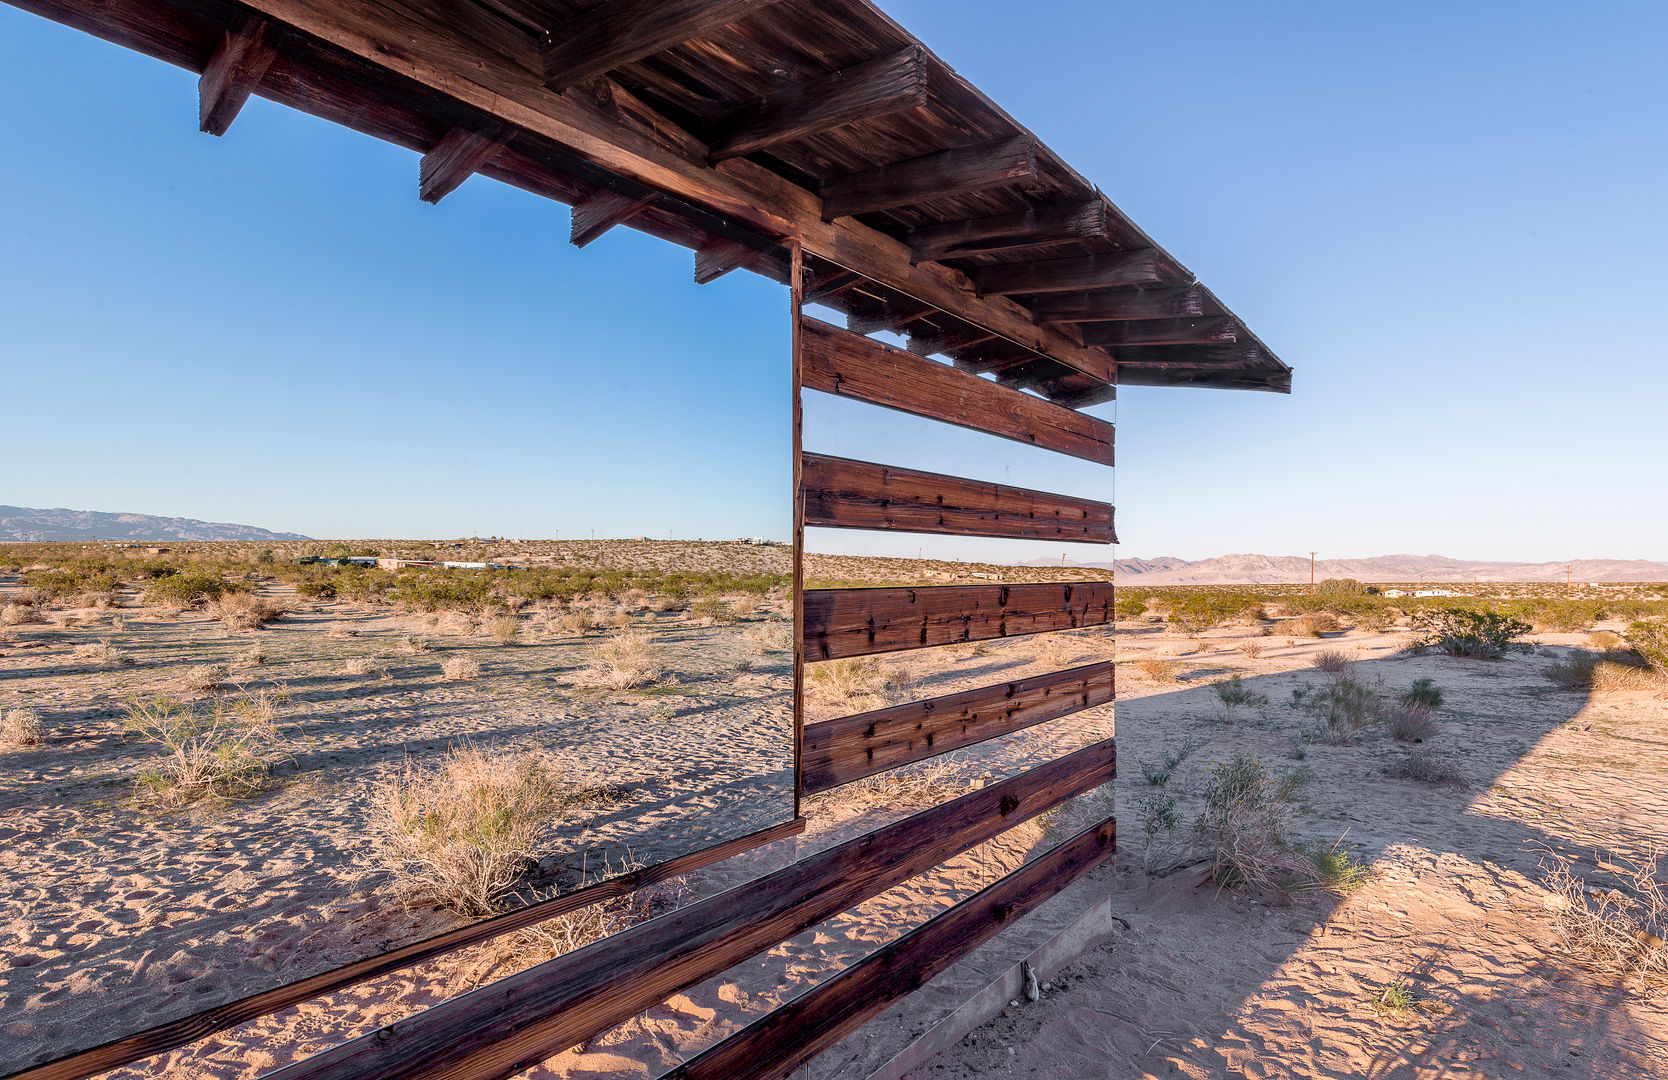 Lucid Stead, royale projects : contemporary art royale projects : contemporary art Case eclettiche